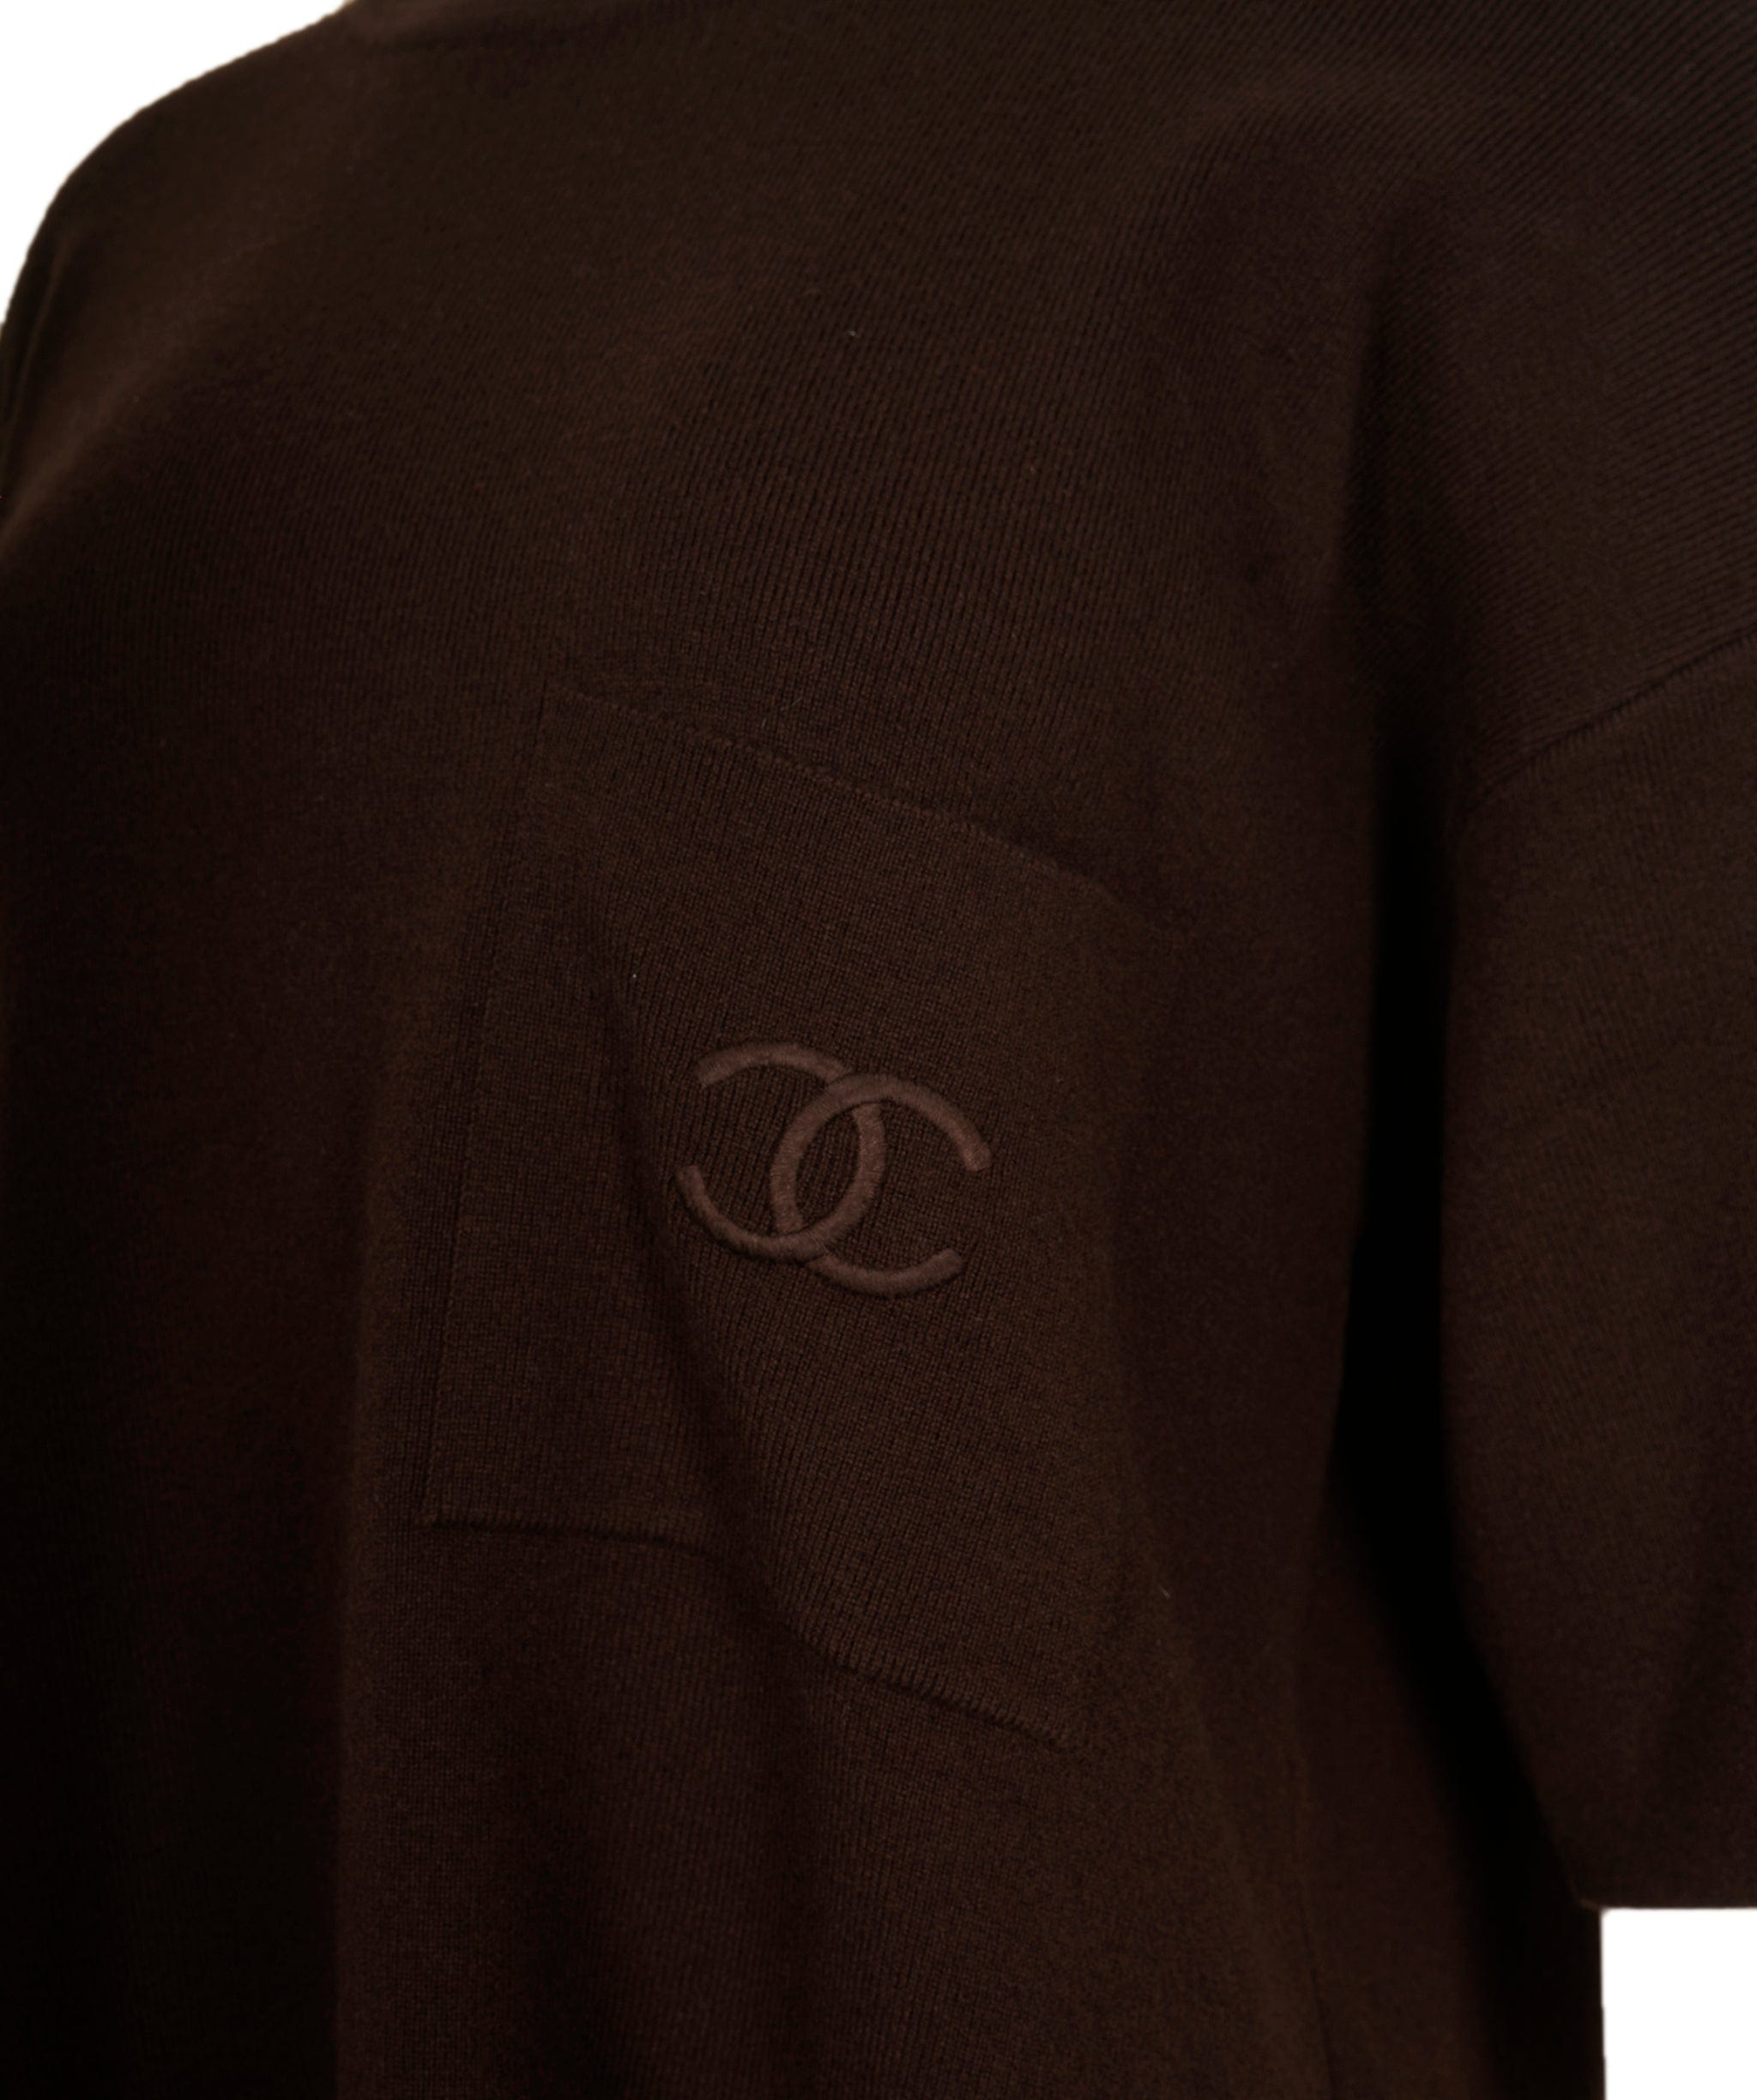 Chanel Chanel CC Pocket Oversized Sweater Brown ASL9716